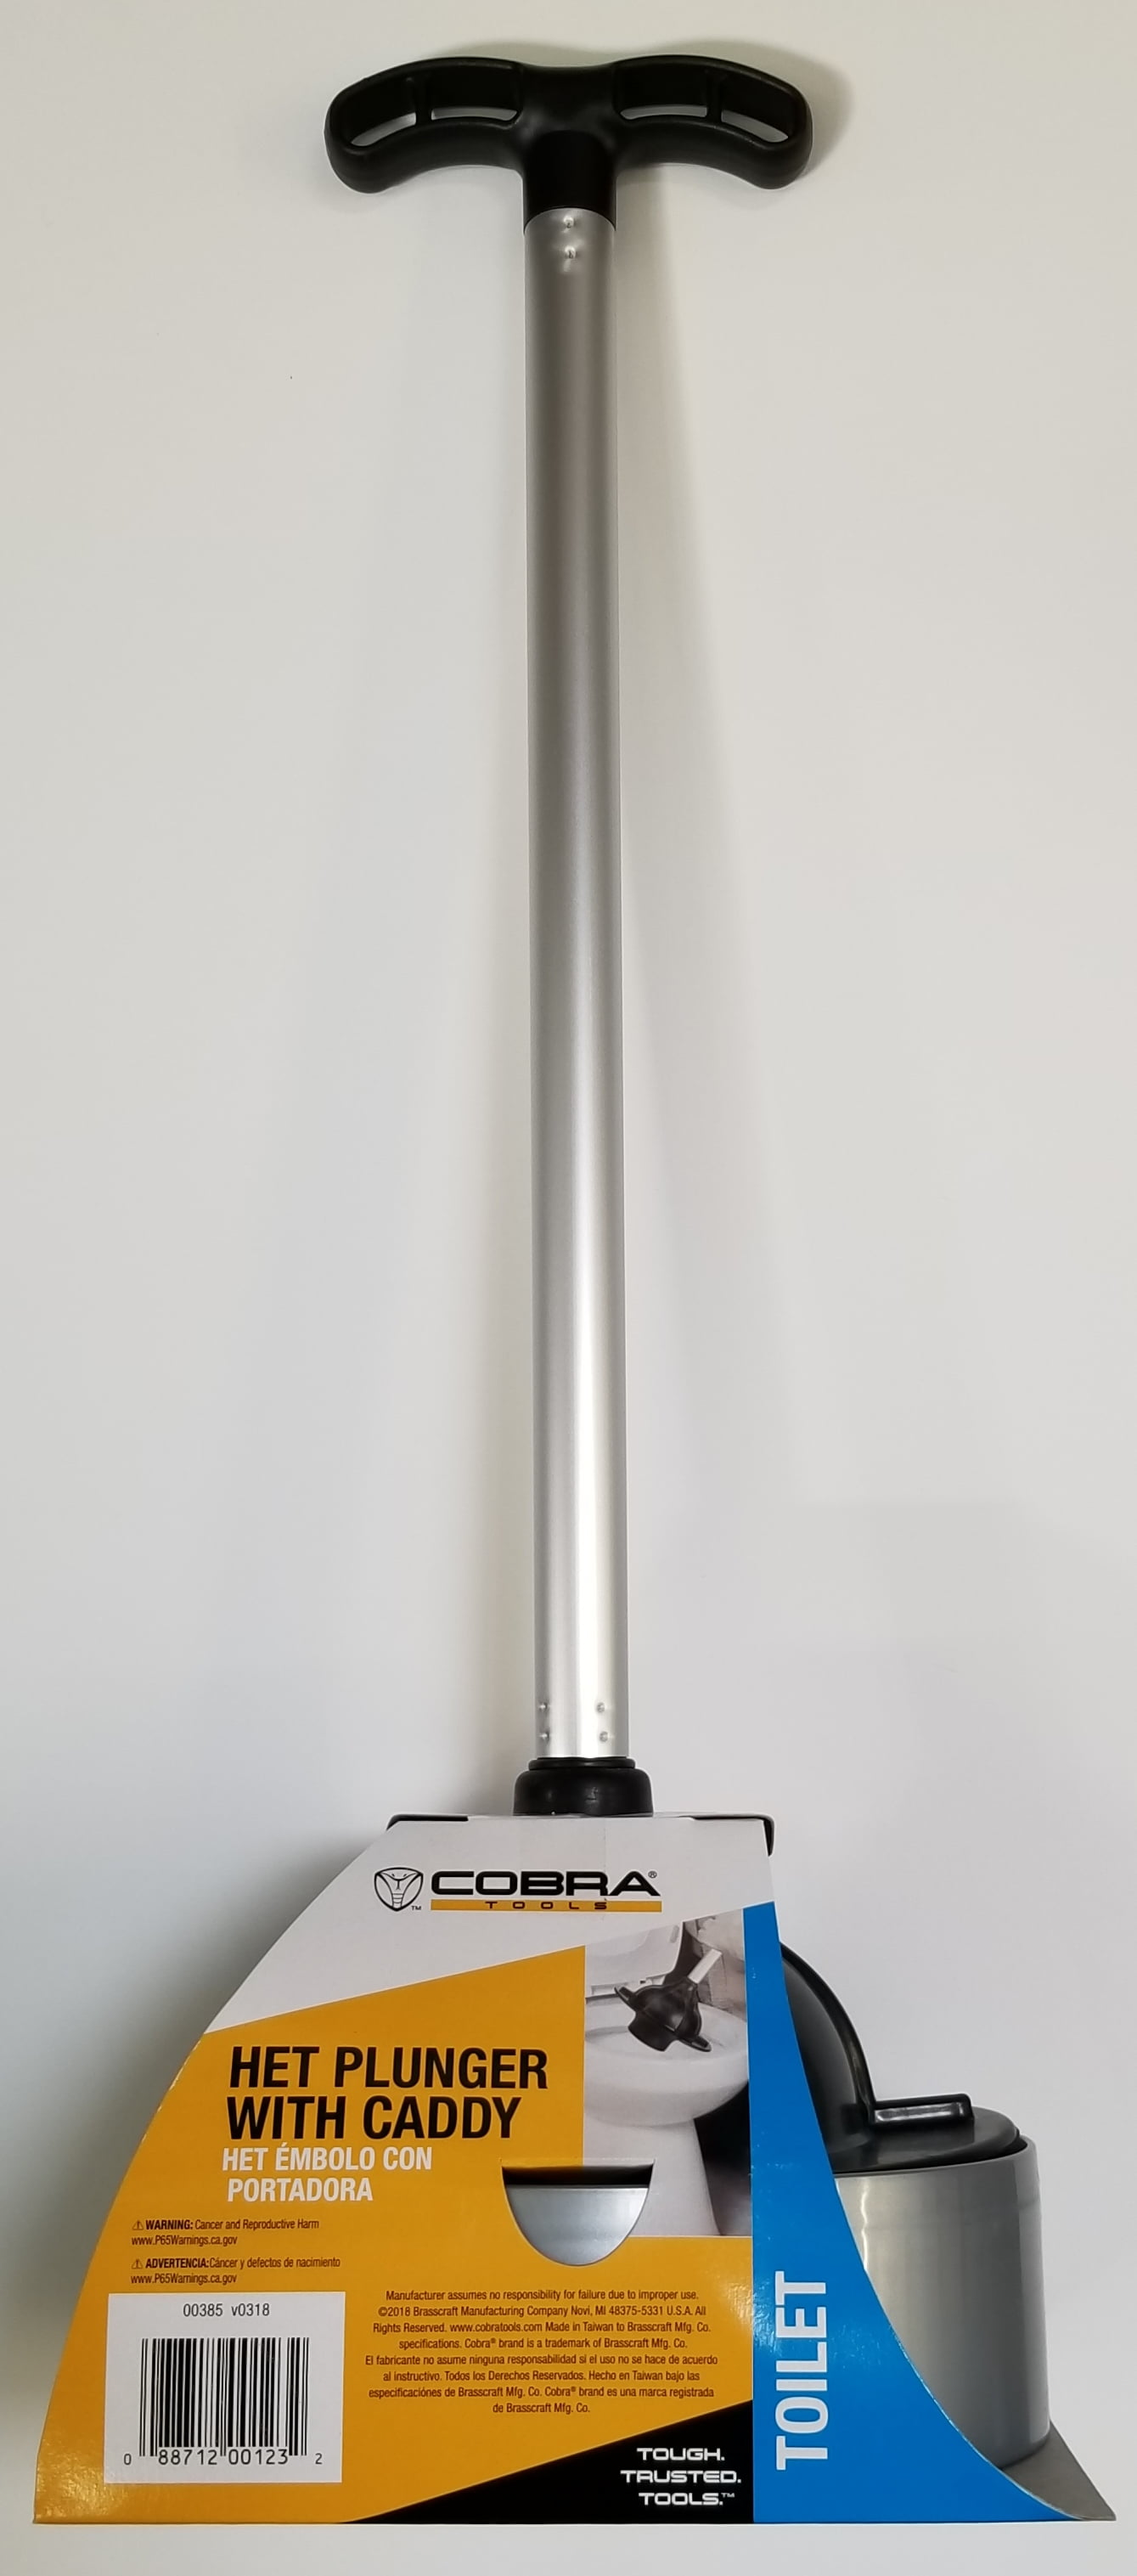 High Pressure Thrust Plunge Heavy Details about   Professional Bellows Accordion Toilet Plunger 